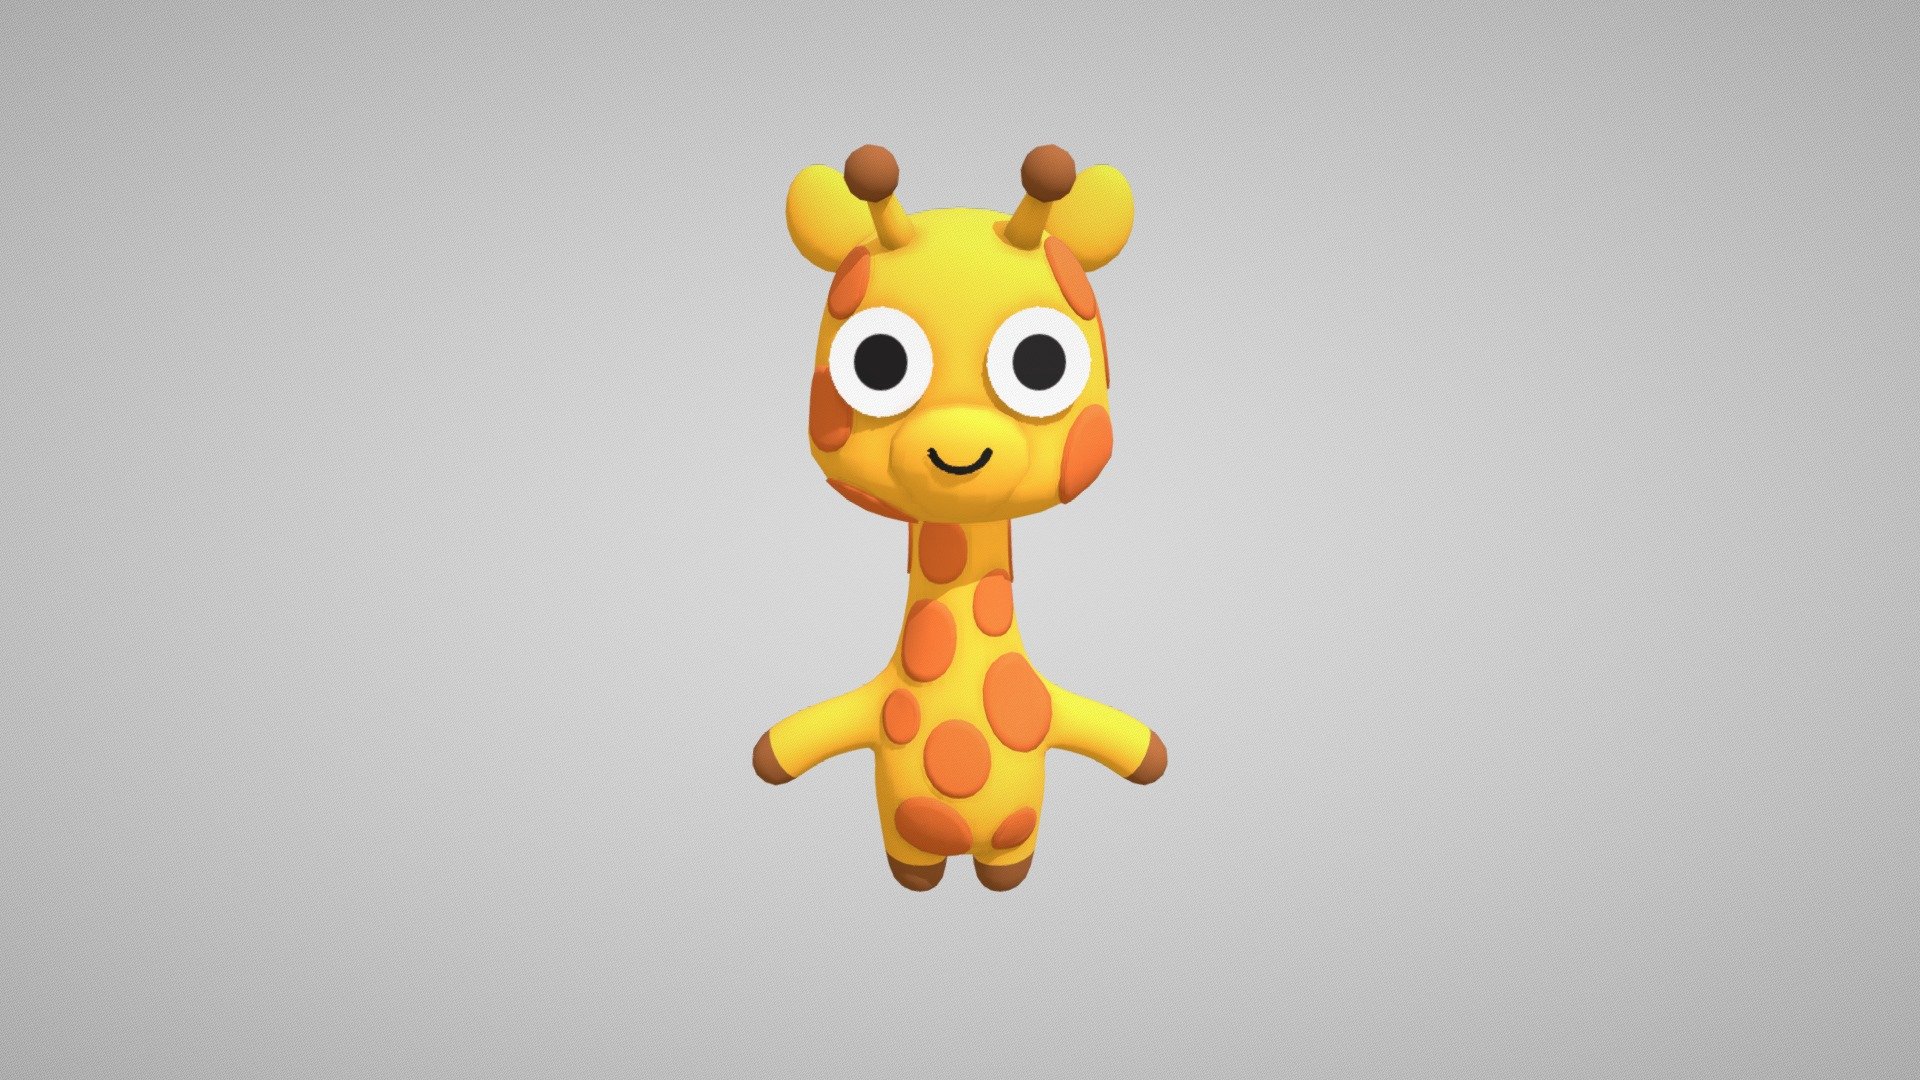 Cute Adorable Stylized Giraffe. Full Facial animation emotion Sheets. Mix and match different expressions! Fully rigged and ready to be posed and animated. 3D Printable animal crossing style character. Game ready Textured 3d Asset 3d model